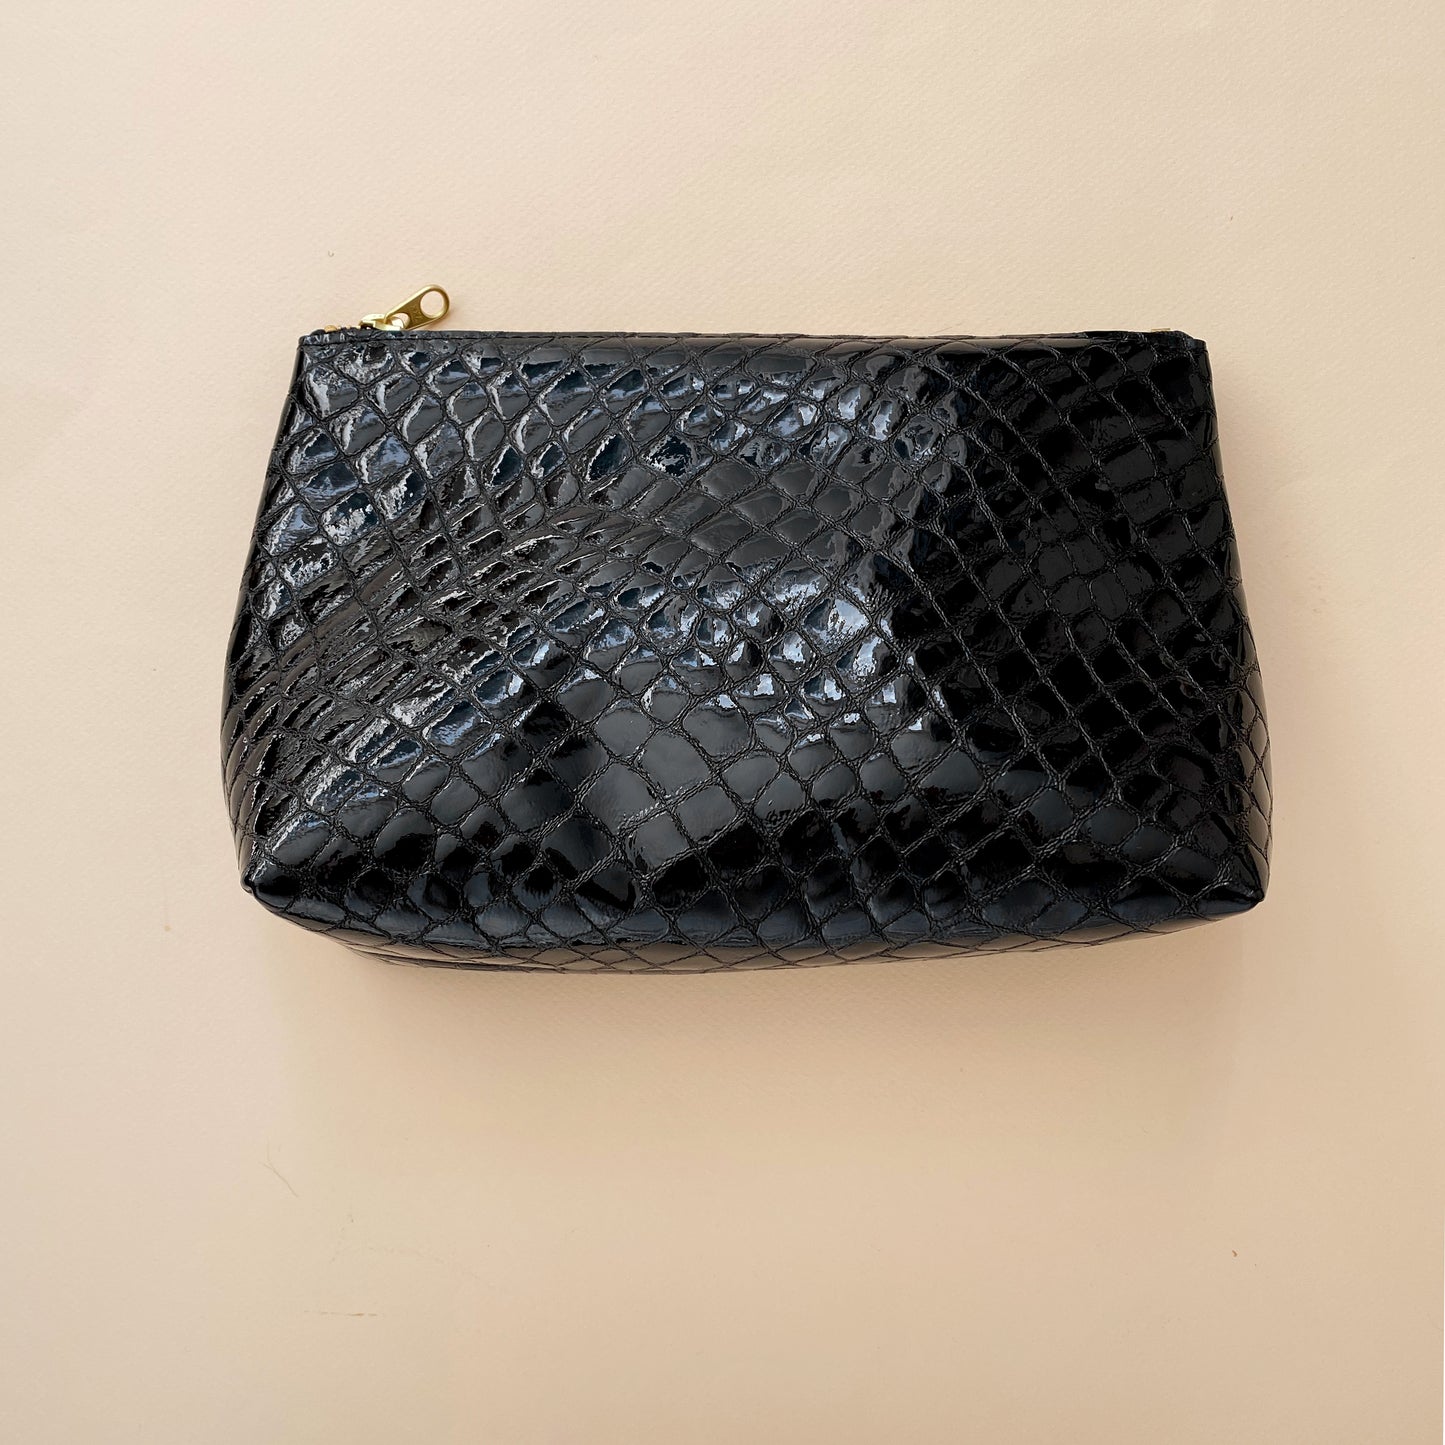 Marilyn Makeup Clutch Large 9"